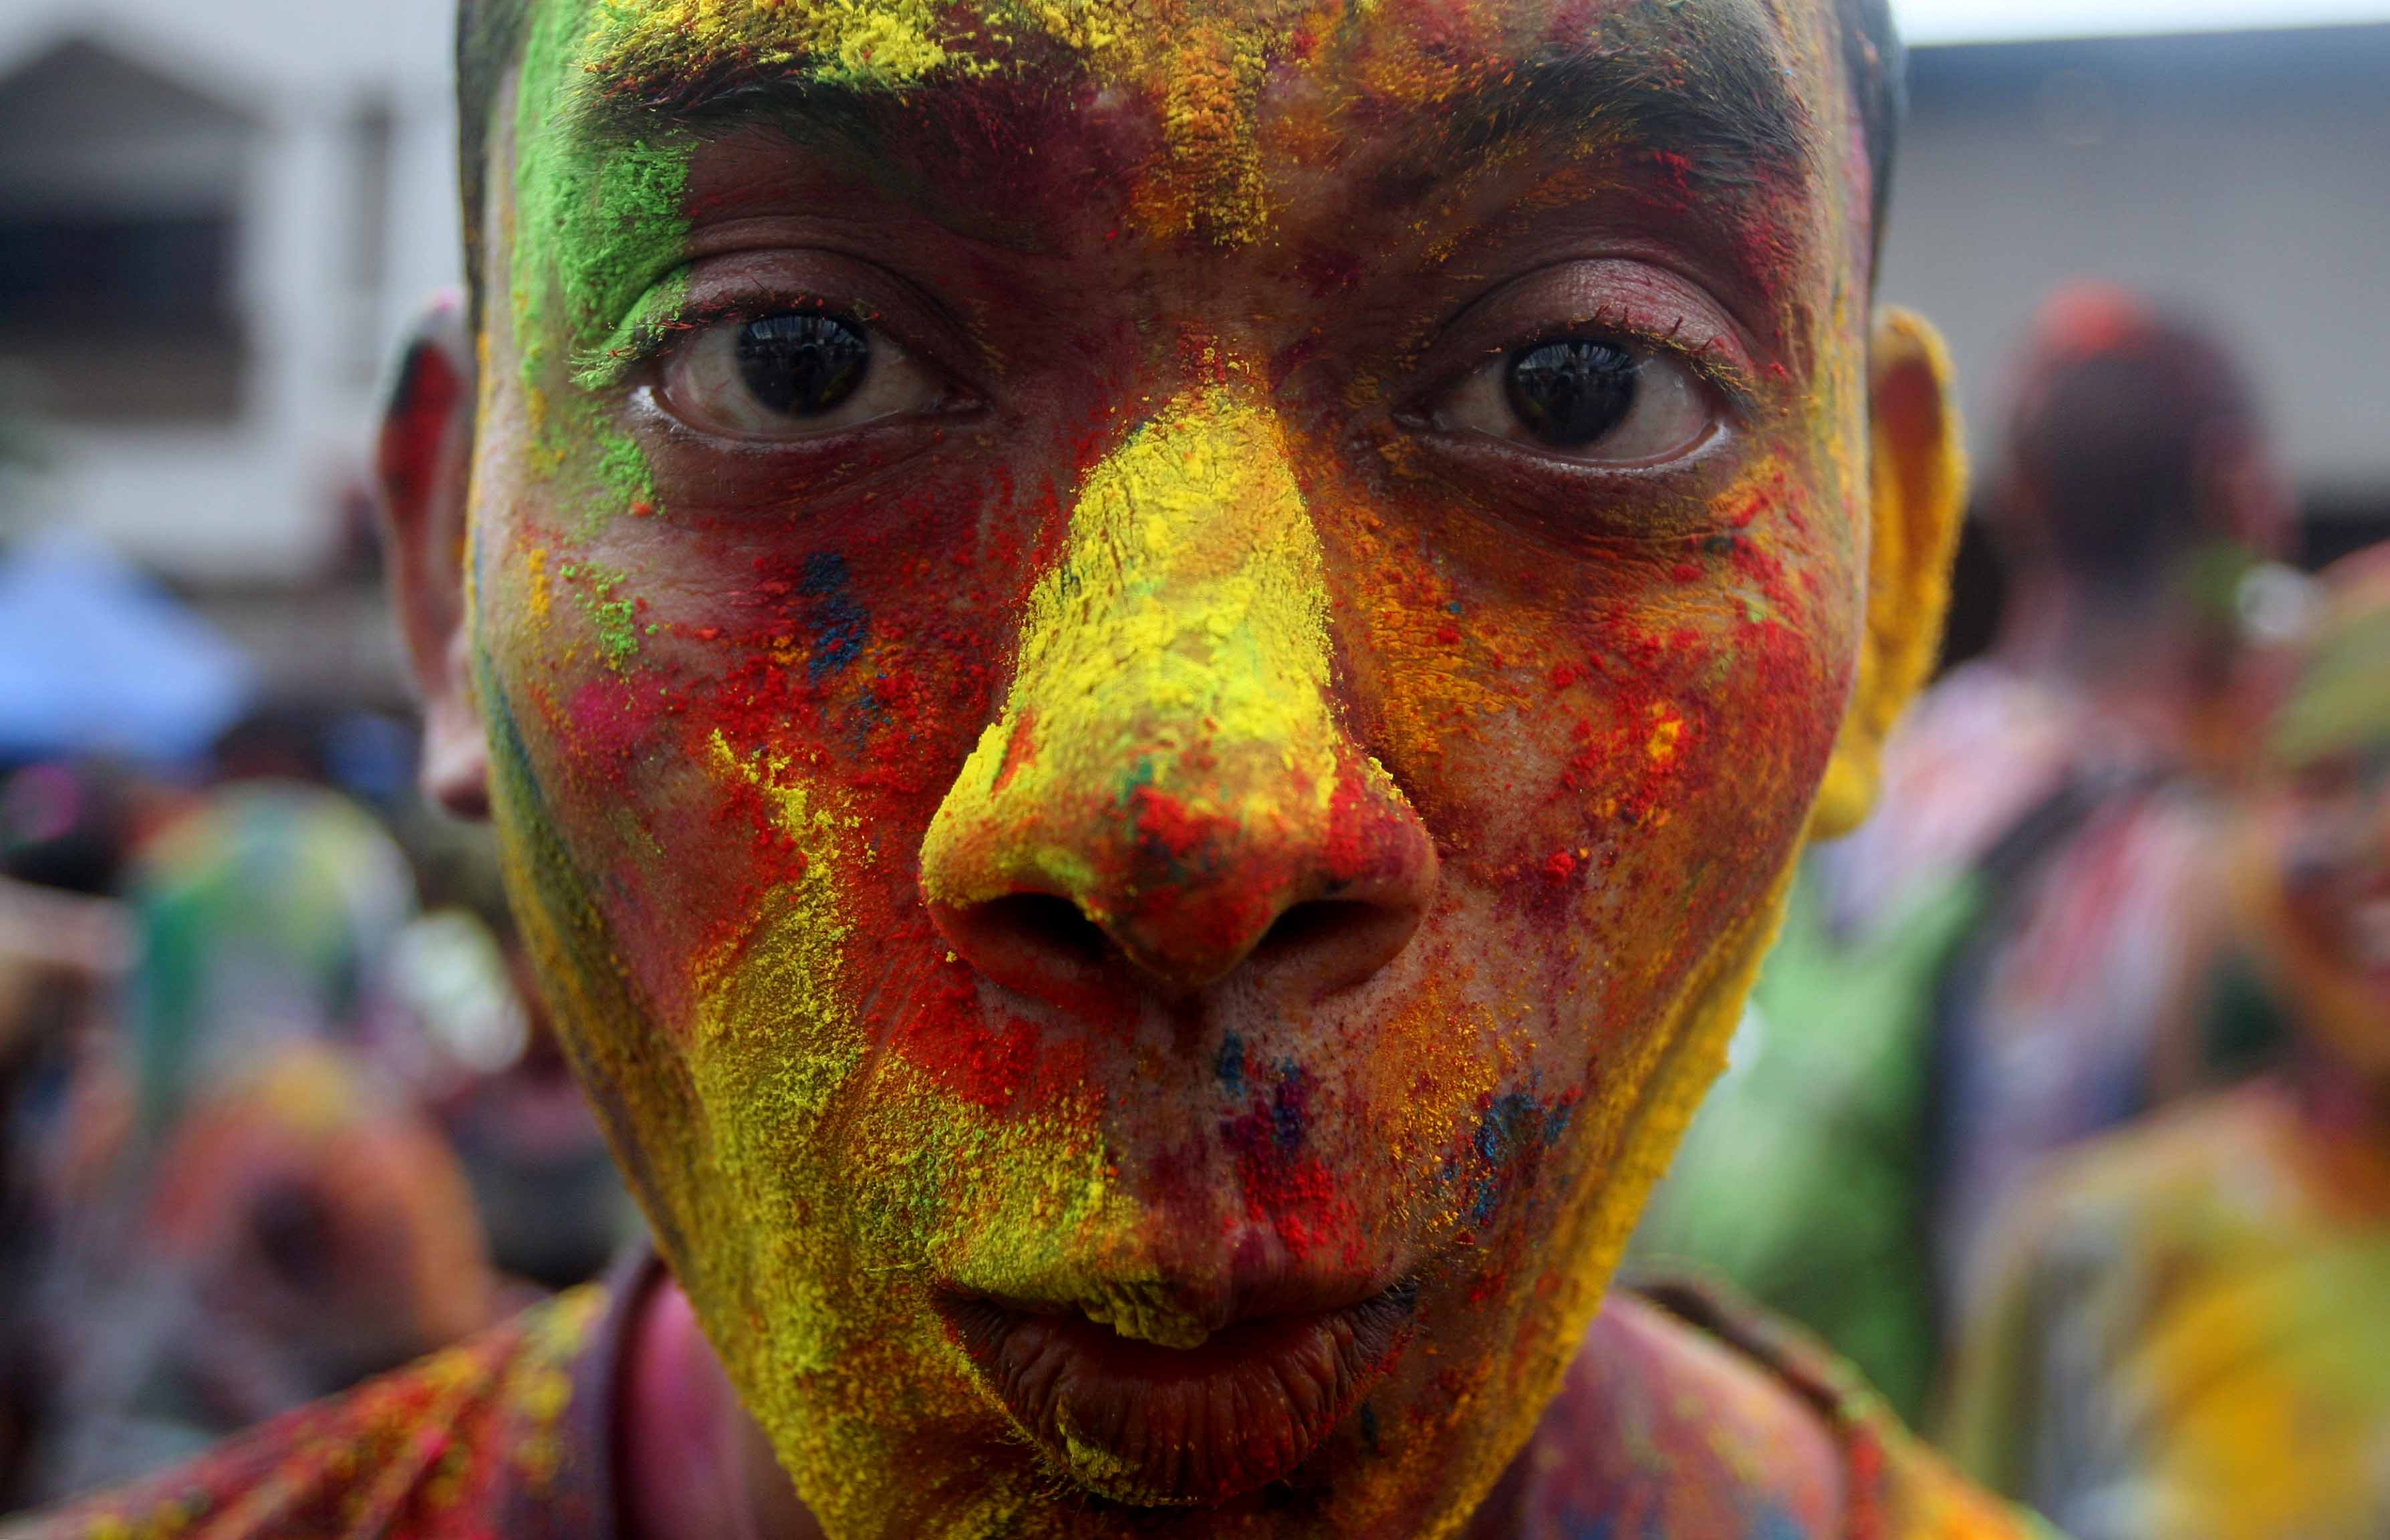 A boy face smeared with coloured powder during Holi festival celebrations at Shree Lakshmi Narayan Temple in Kuala Lumpur on March 31,2013 - a-boy-face-smeared-with-coloured-powder-during-holi-festival-celebrations-at-a-shree-lakshmi-narayan-temple-in-kuala-lumpur-on-march-312013